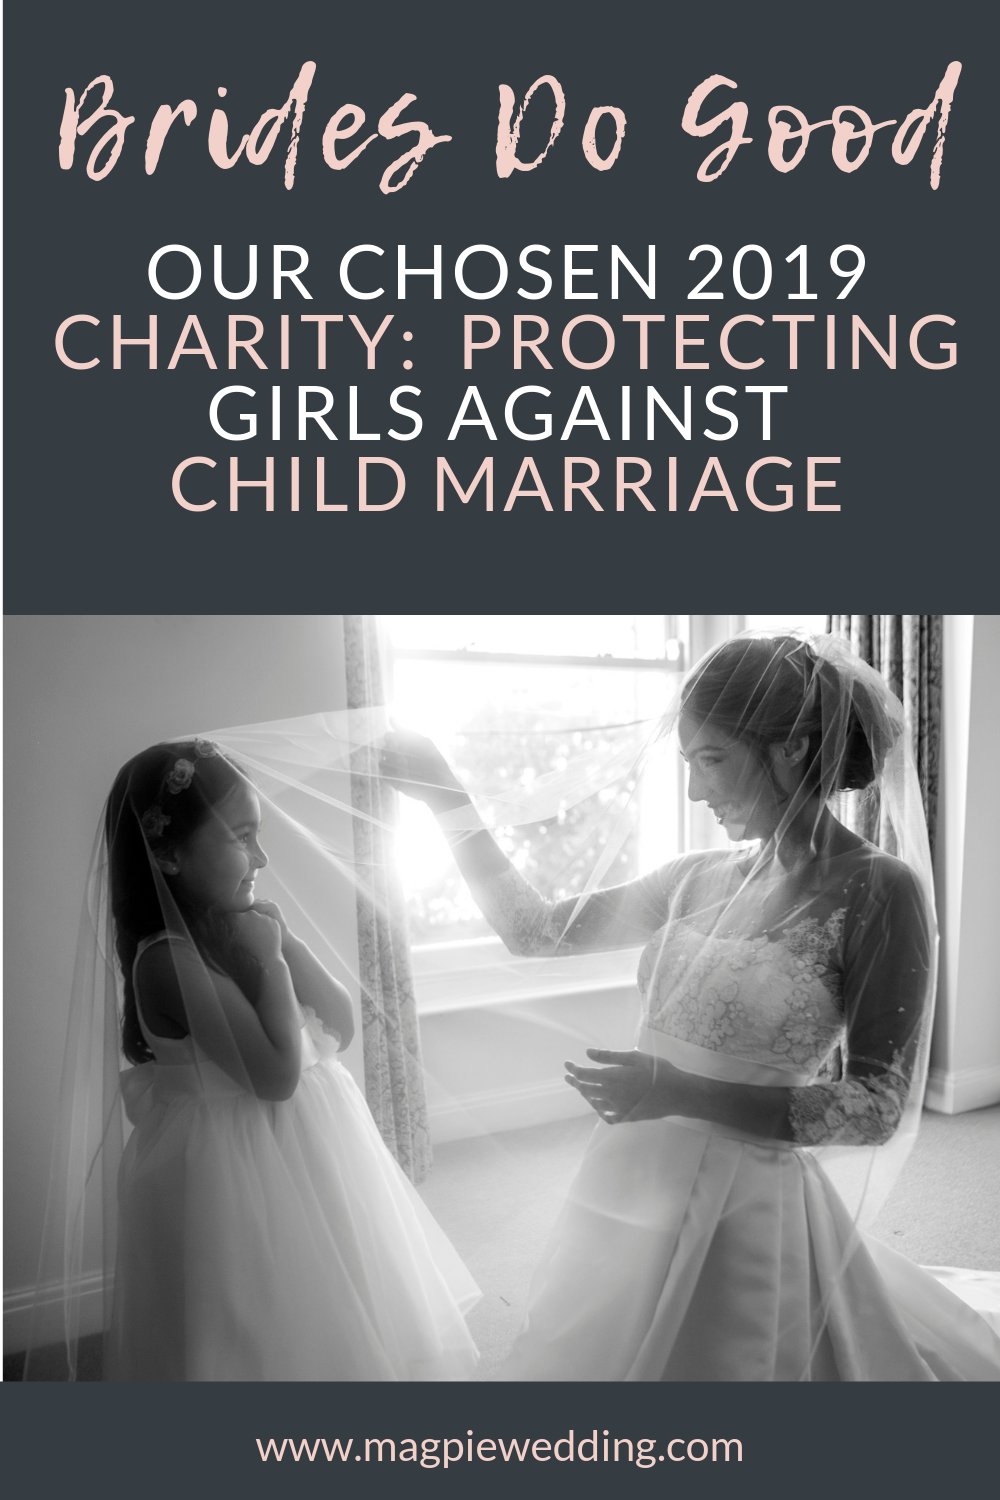 Our Chosen 2019 Charity: Brides Do Good, Protecting Girls Against Child Marriage